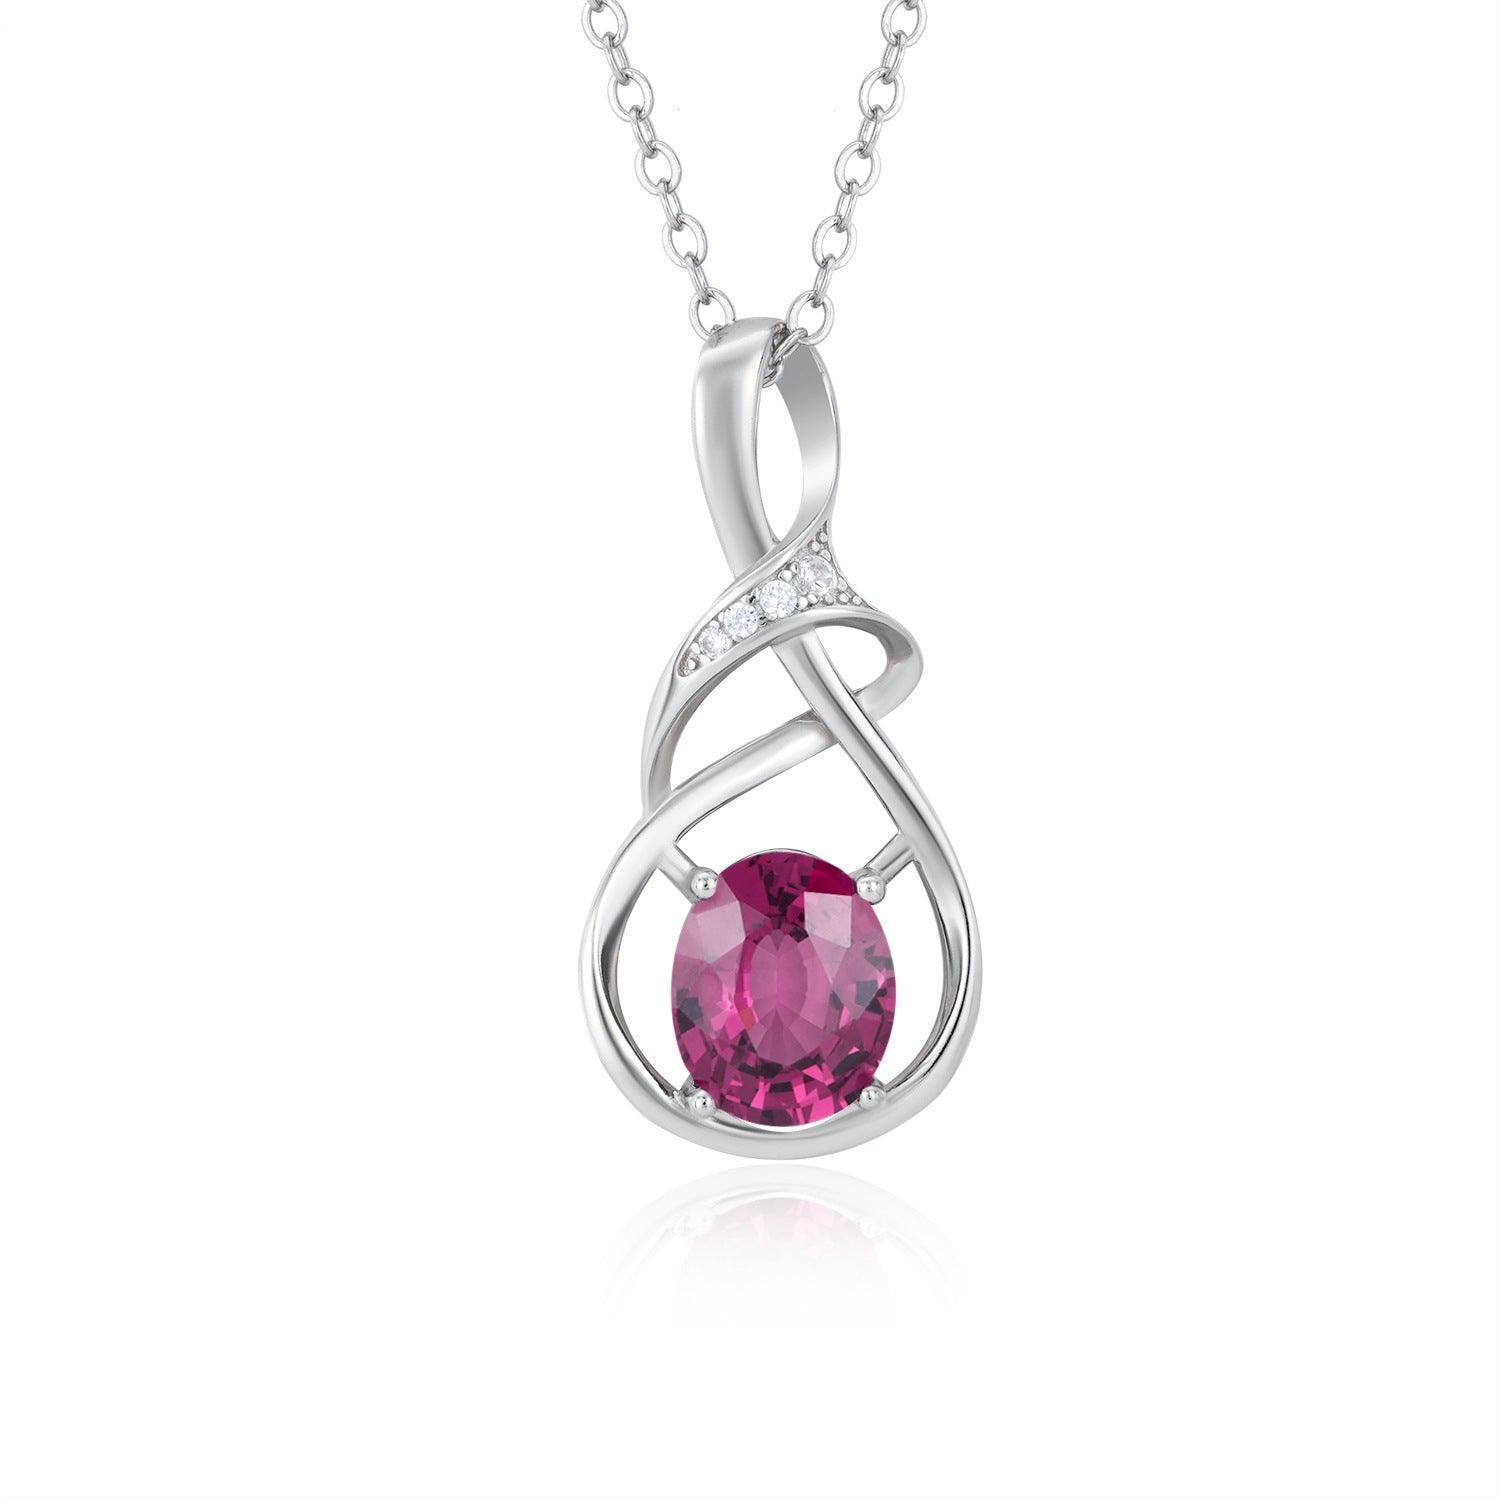 Amethyst S925 Silver Inlaid Pendant Necklace in 2023 | Amethyst S925 Silver Inlaid Pendant Necklace - undefined | Amethyst Inlaid Pendant, luxury necklace, Rose Gold Necklaces, S925 Silver Inlaid Pendant Necklace | From Hunny Life | hunnylife.com